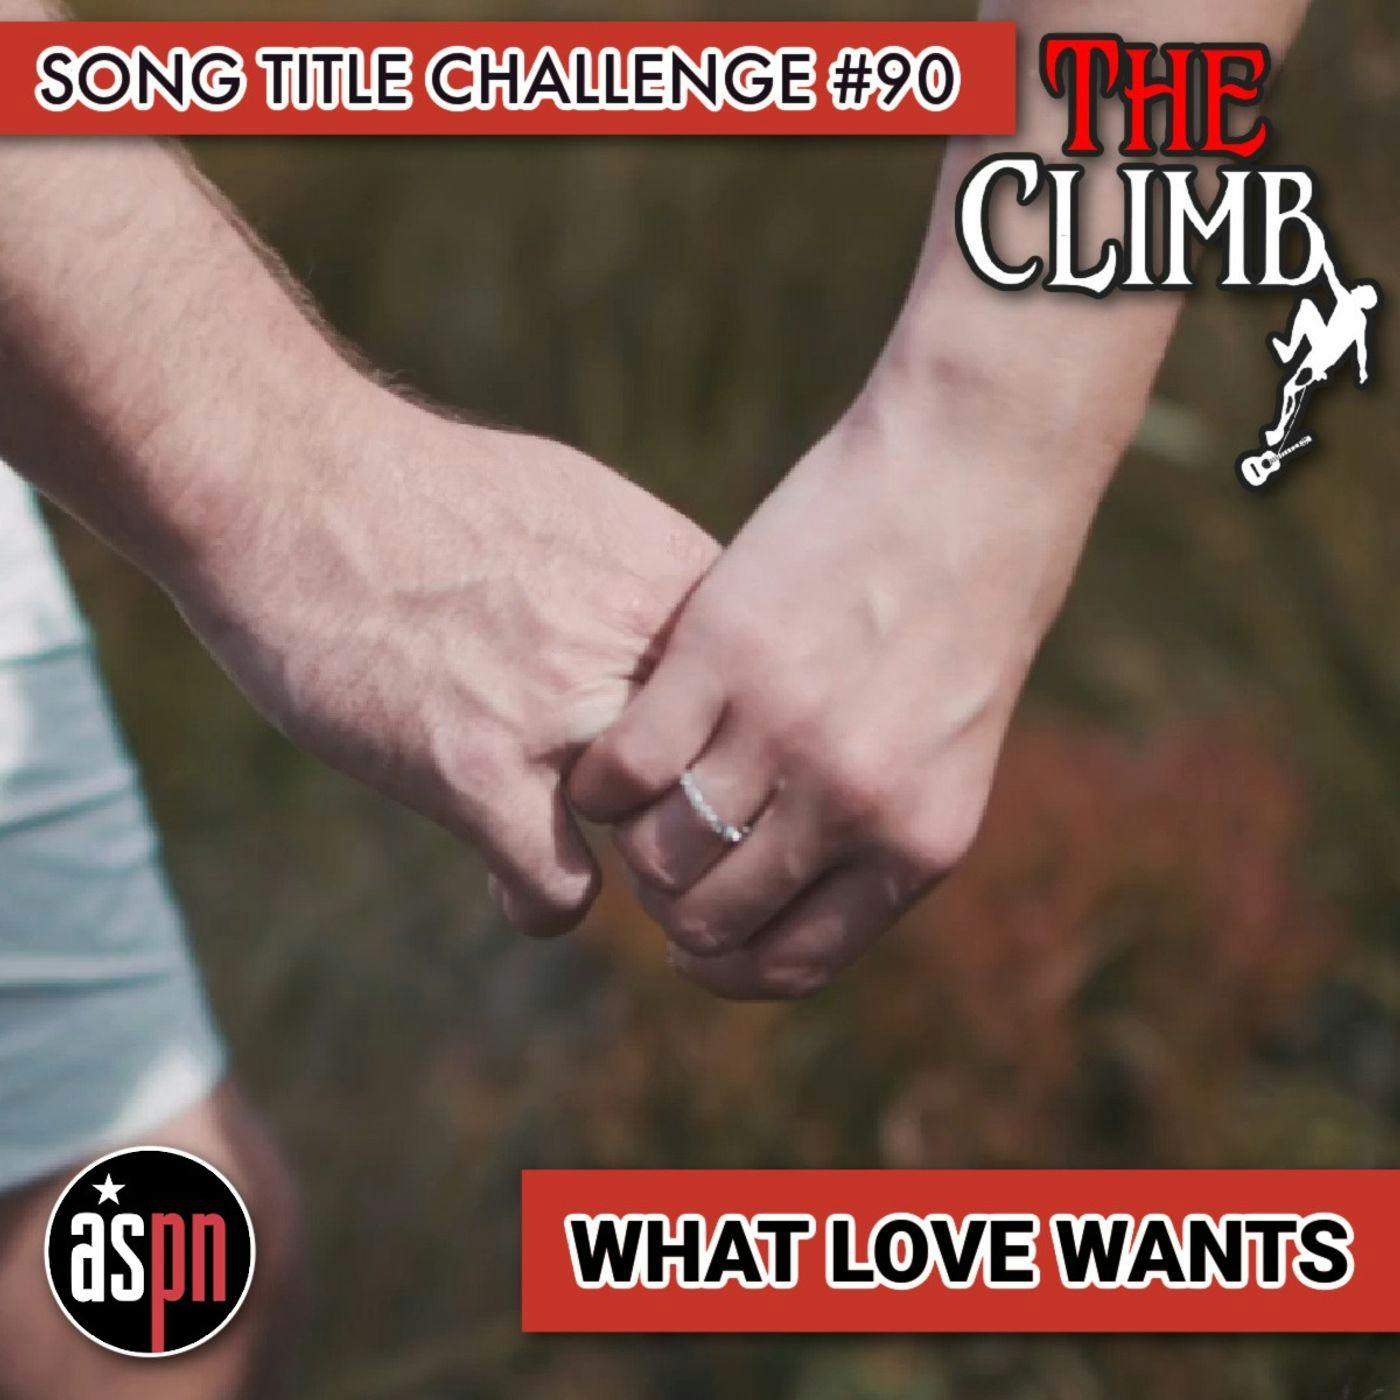 Song Title Challenge #90: What Love Wants